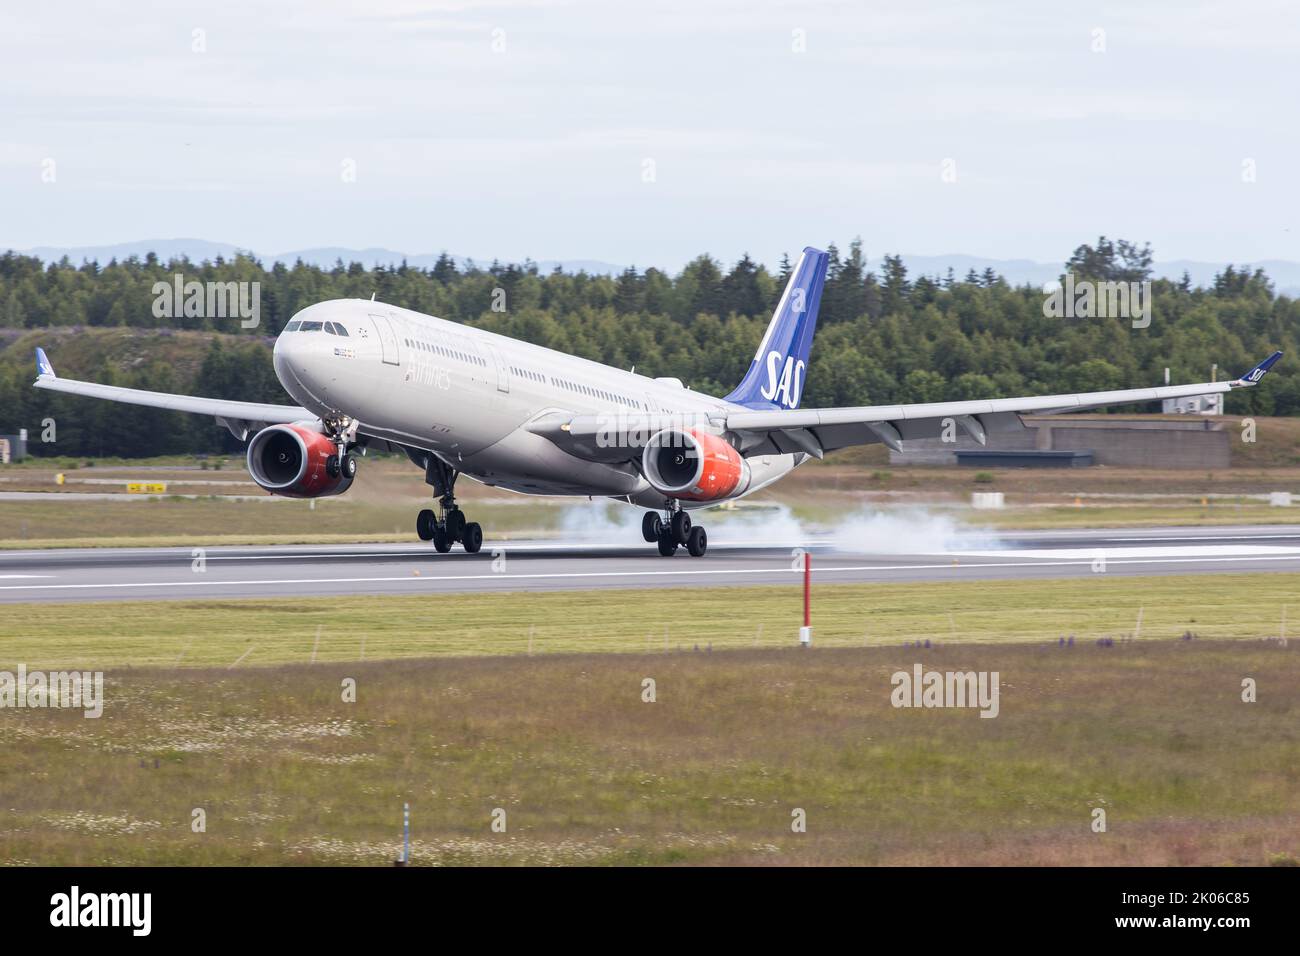 A SAS Scandinavian Airlines Airbus A330-300 arriving at Oslo Airport after a long range flight from the USA Stock Photo